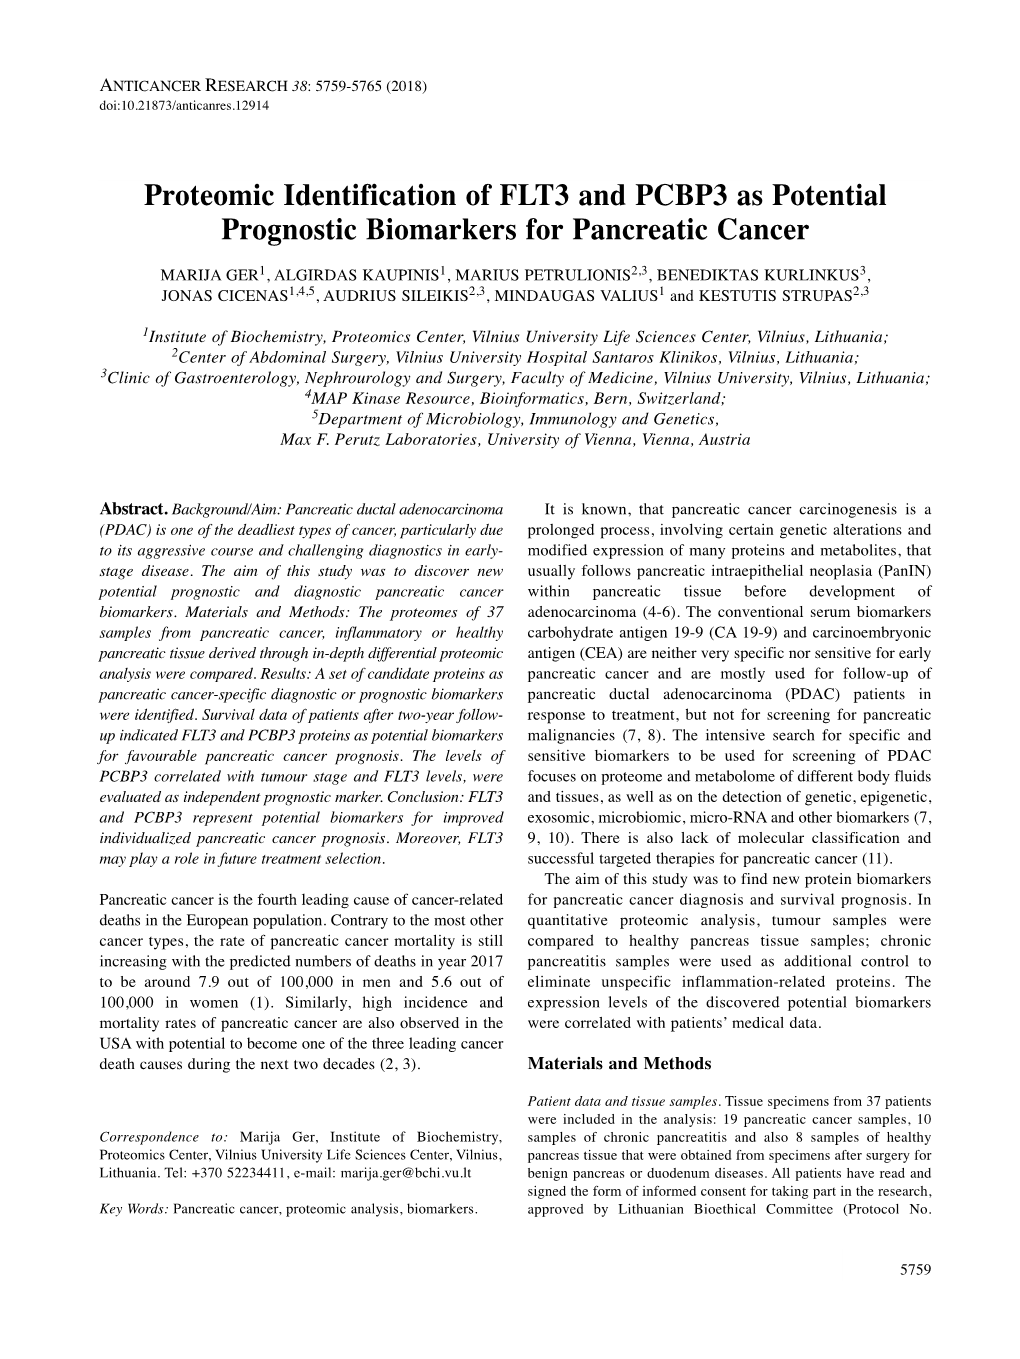 Proteomic Identification of FLT3 and PCBP3 As Potential Prognostic